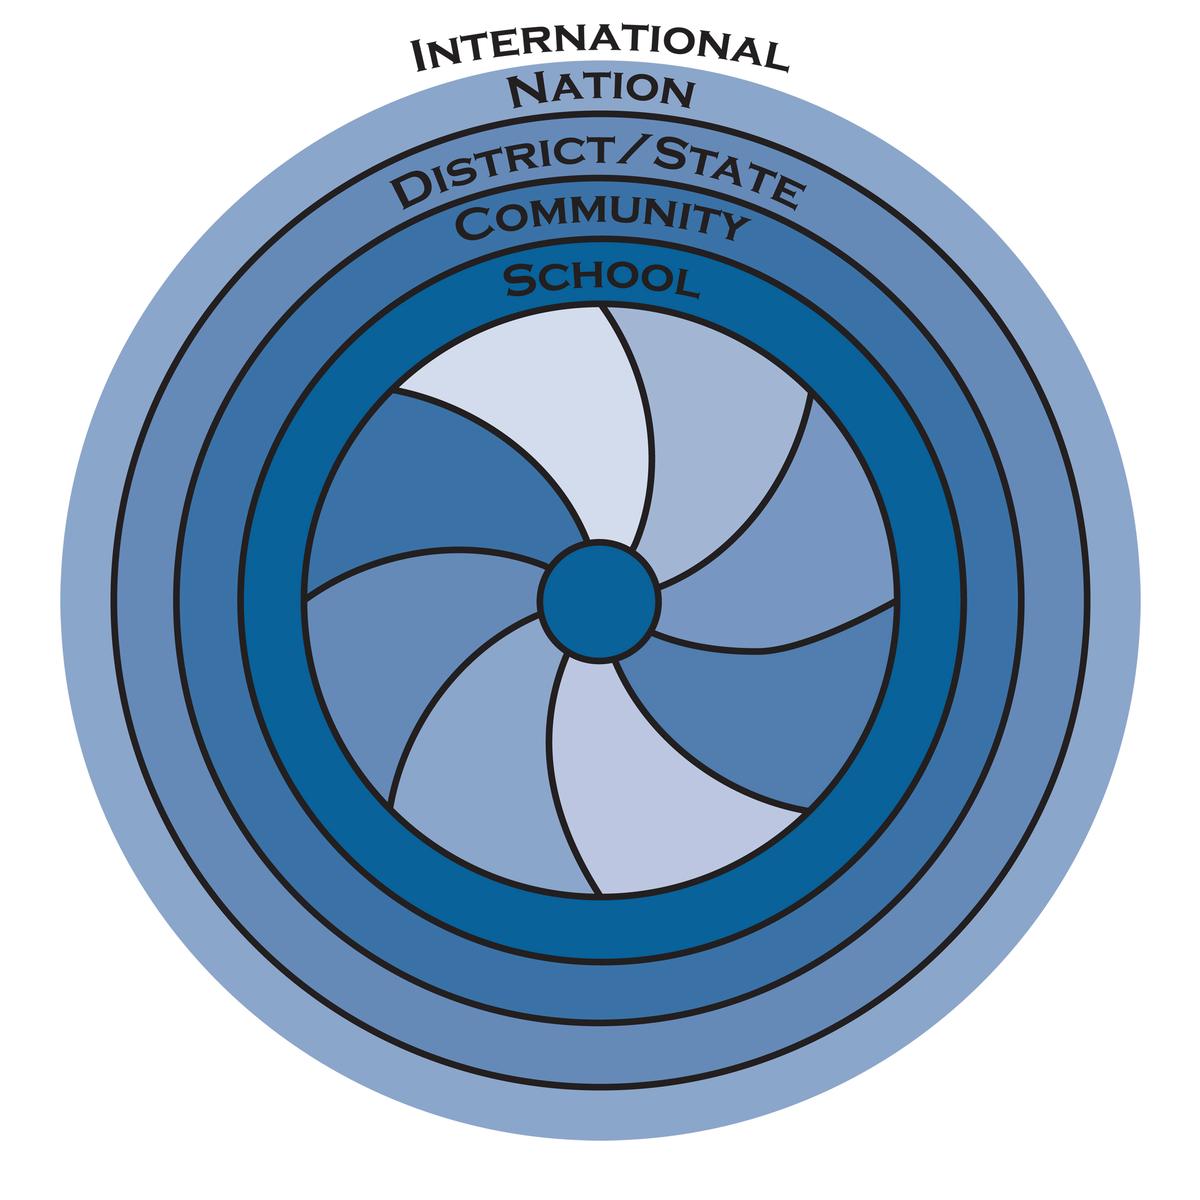 A graphic showing the conceptual framework context which features a bunch several layers radiating out from a middle circle. The layers, from innermost to outermost, are school, community, district or state, nation, international.